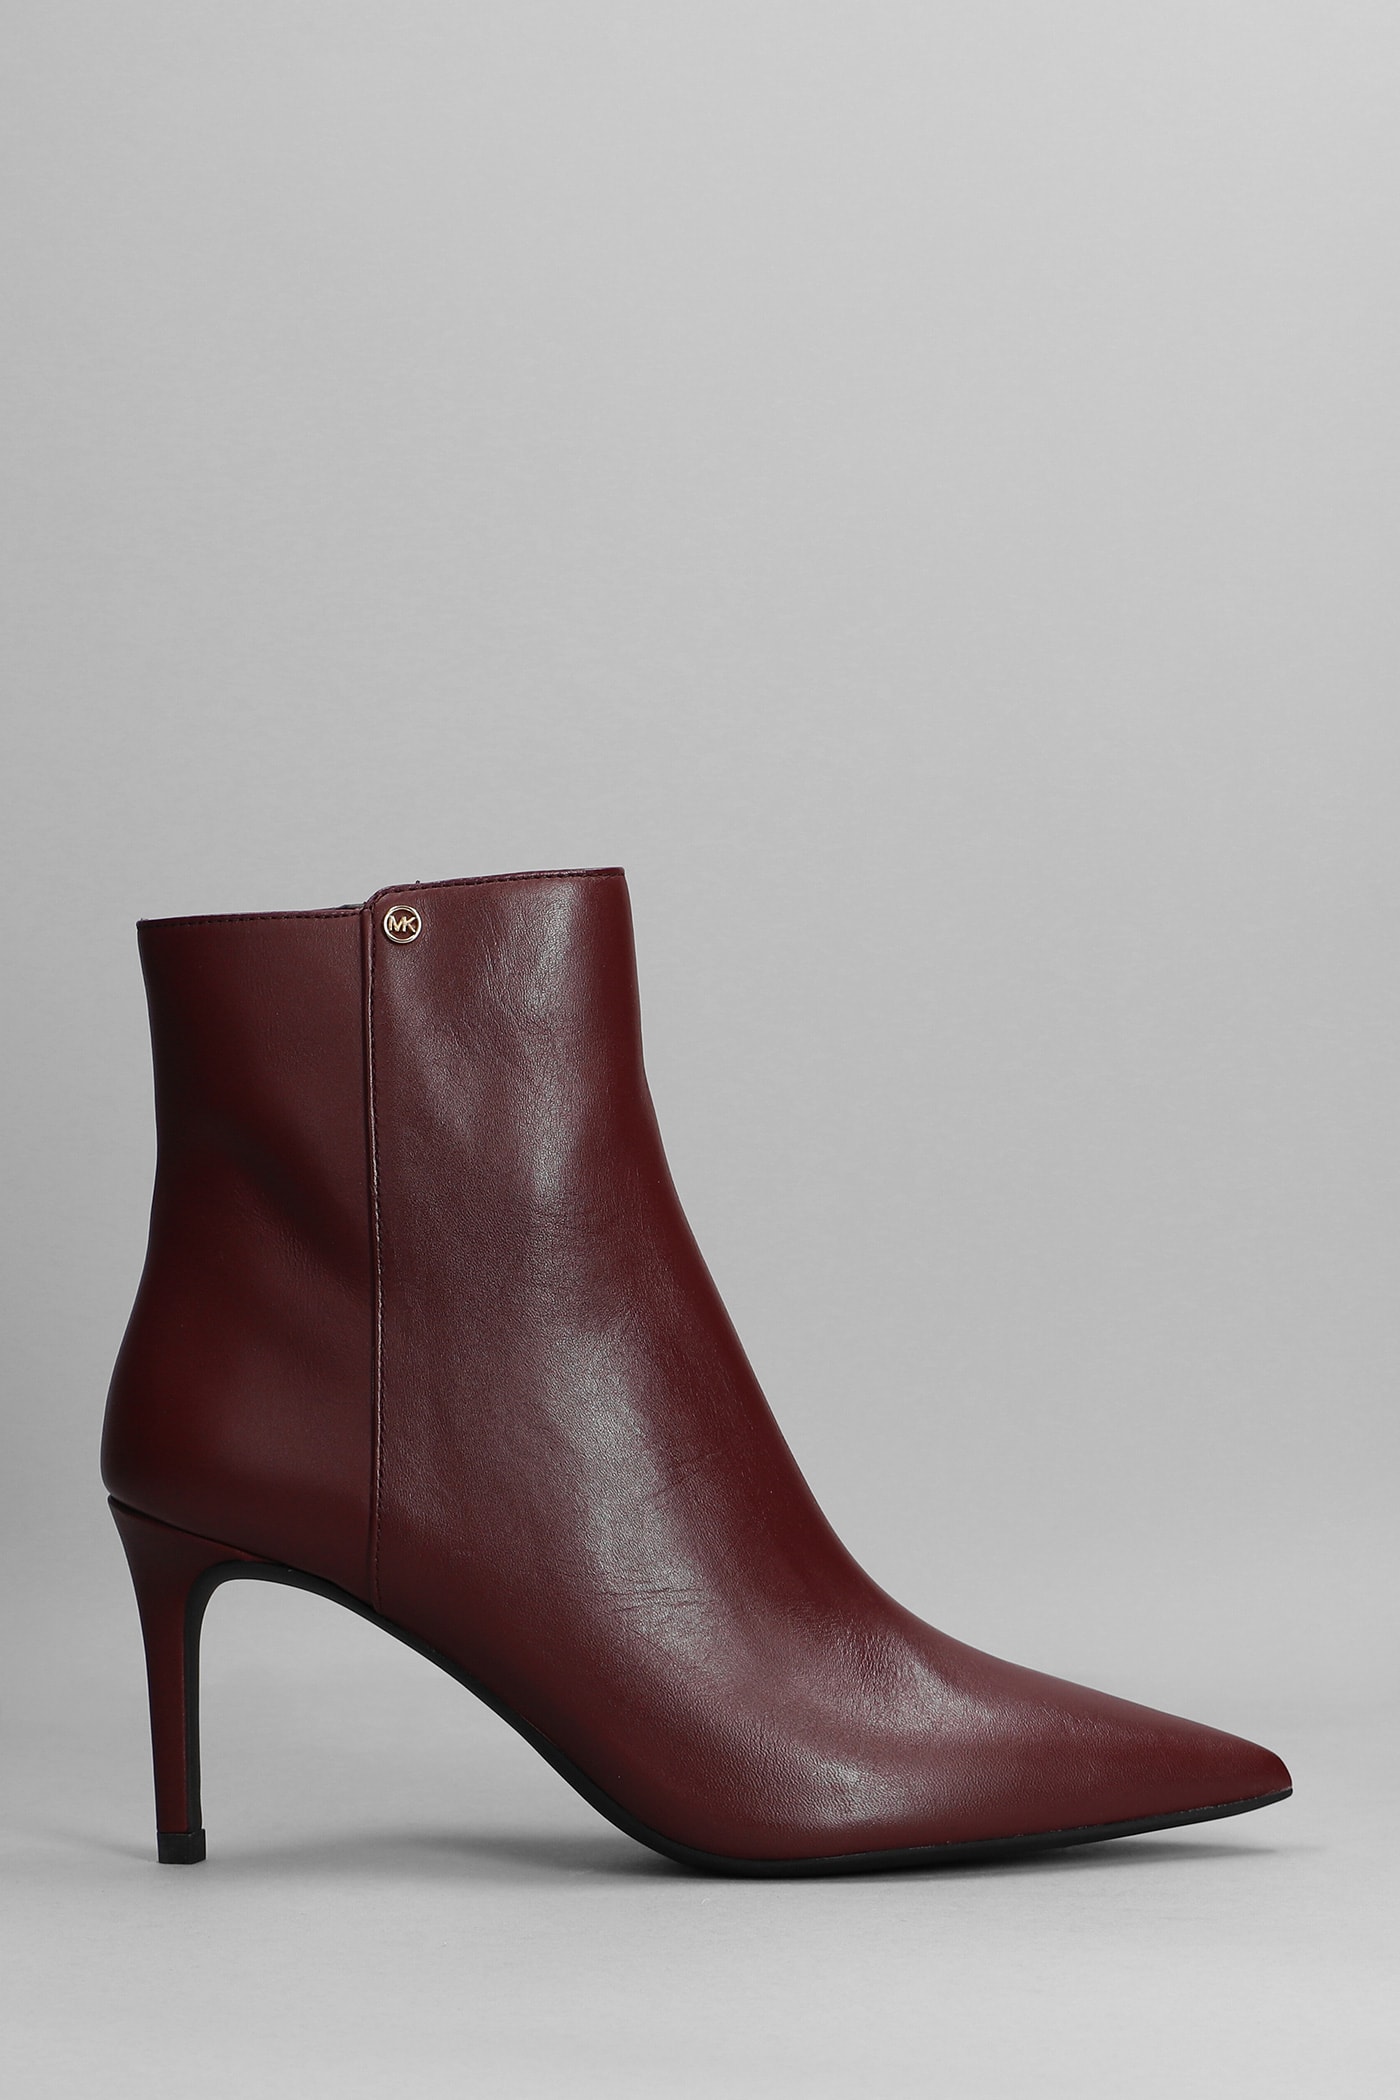 Michael Kors Alina Flex High Heels Ankle Boots In Bordeaux Leather